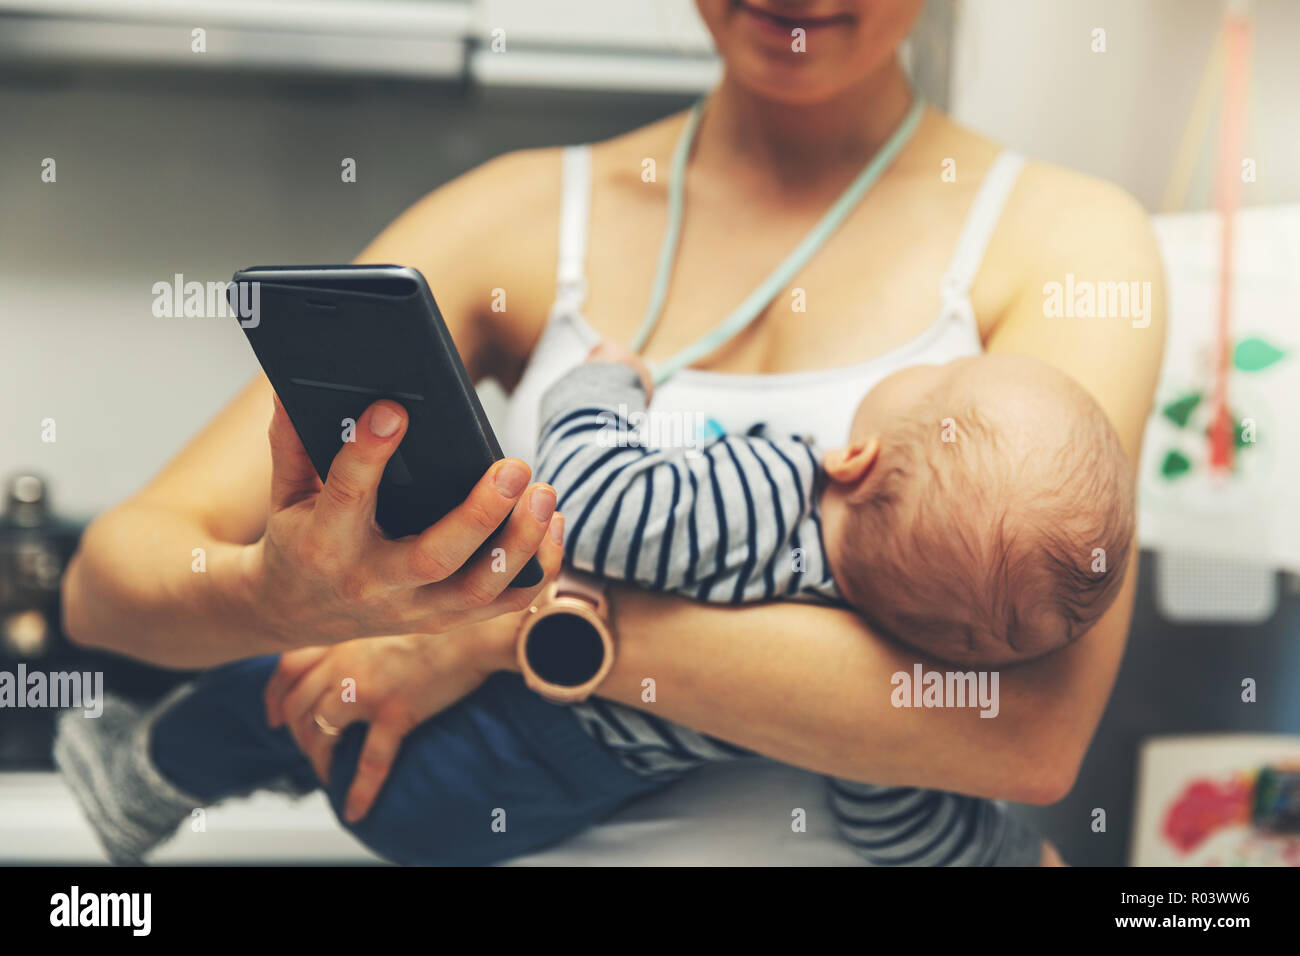 mother is using smartphone while holding infant baby Stock Photo